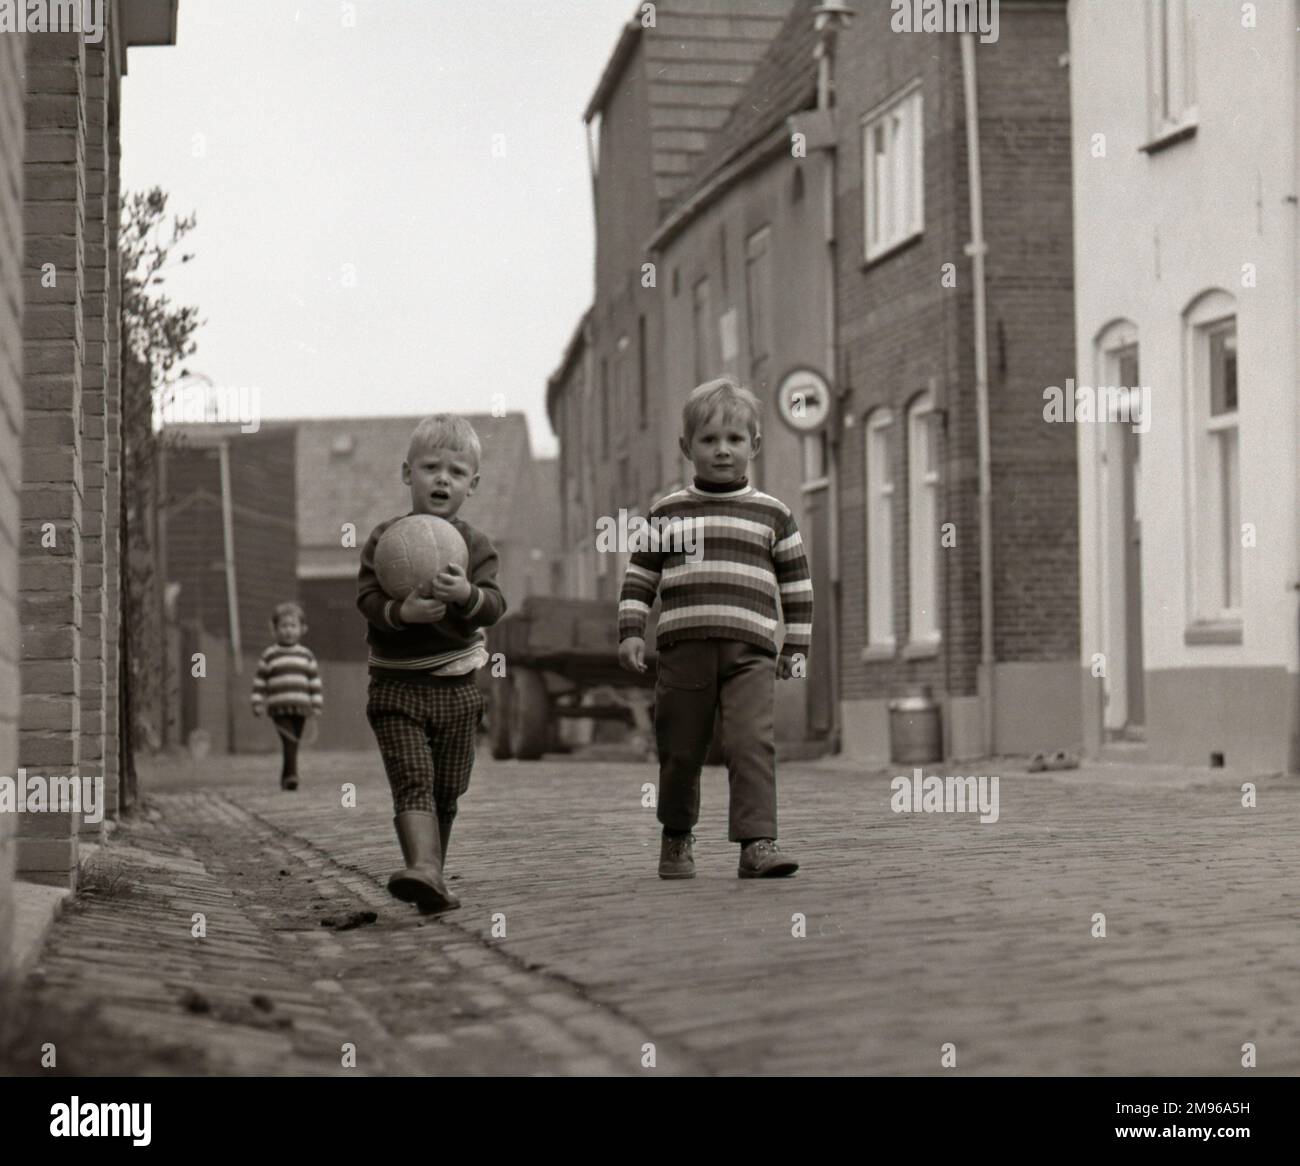 Two small boys in the street, one in a stripy sweater and the other carrying his football. Stock Photo